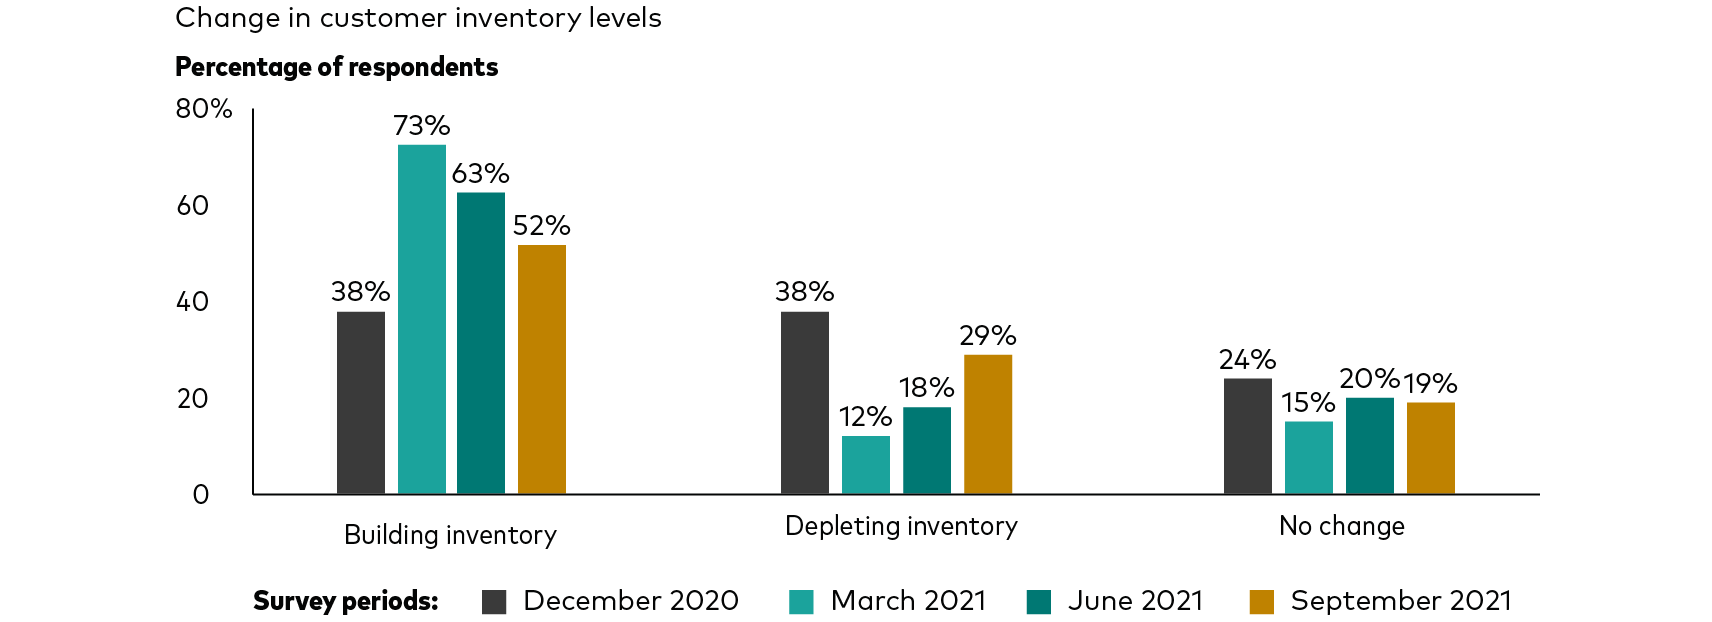 A bar chart shows the percentage of survey respondents who reported that their companies were building chip inventory, depleting chip inventory, or experiencing no change in chip inventory. The survey was conducted four times—in December 2020, March 2021, June 2021, and September 2021. For every survey period, the percentage of respondents in the “building inventory” category was equal to or higher than “depleting inventory” or “no change.” 